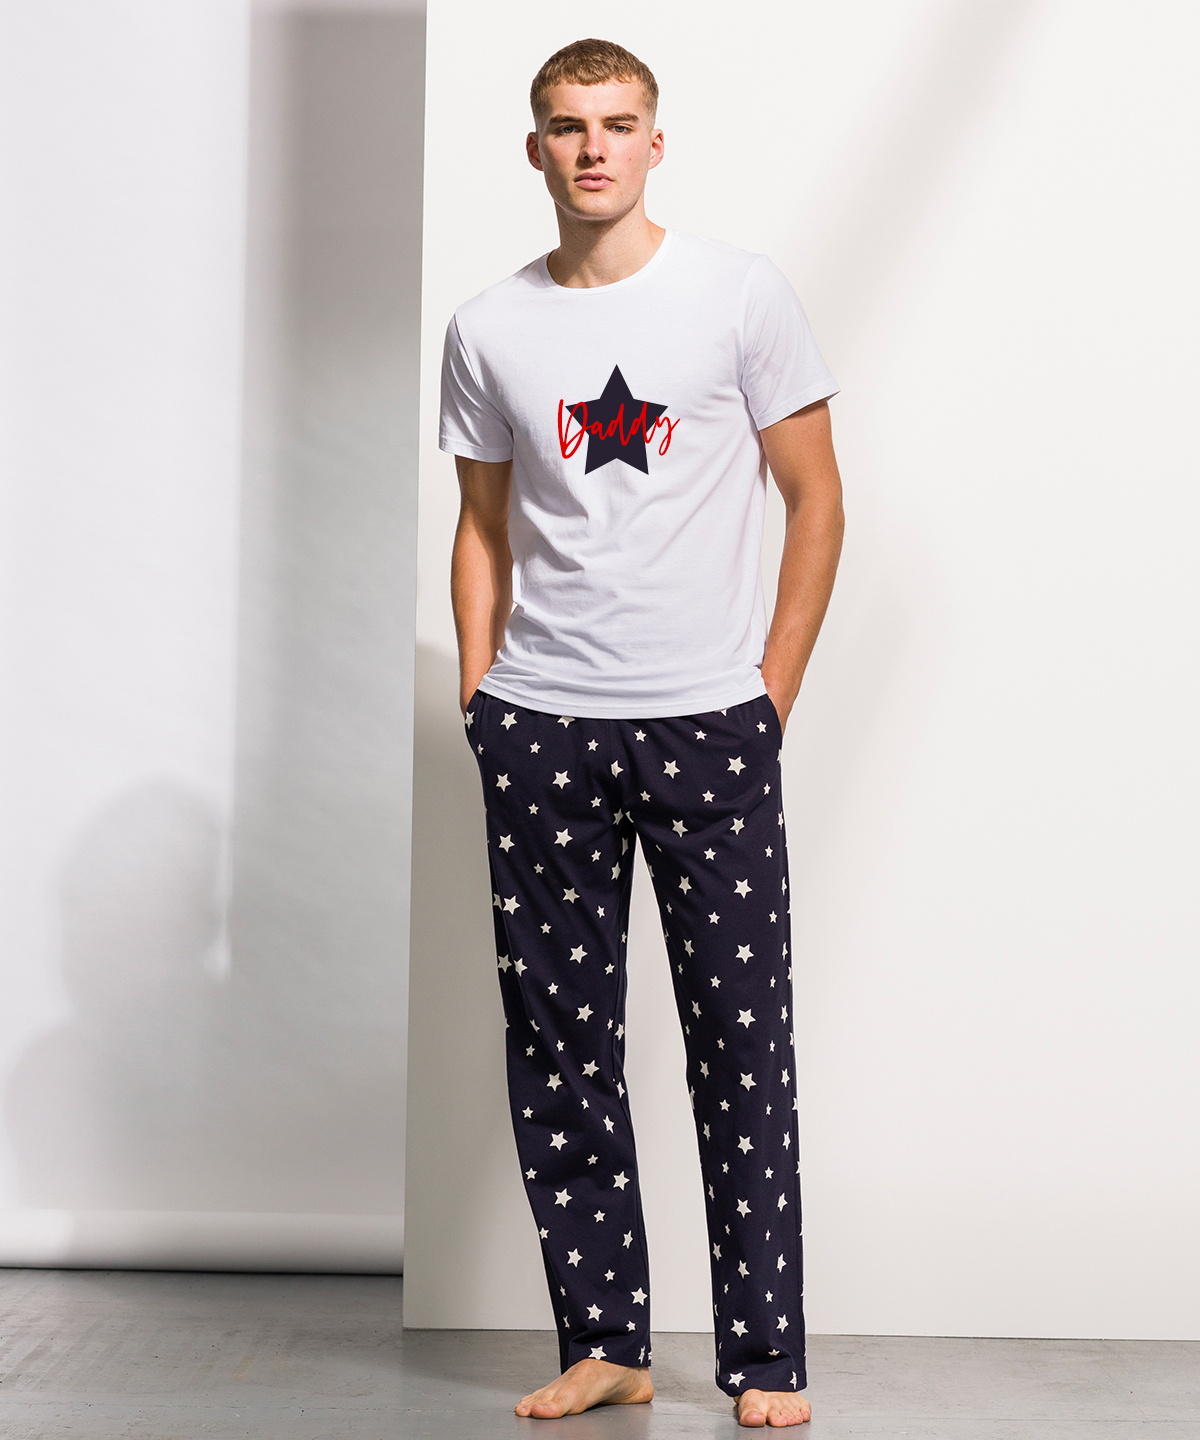 Mens personalised Christmas pyjamas in navy and white